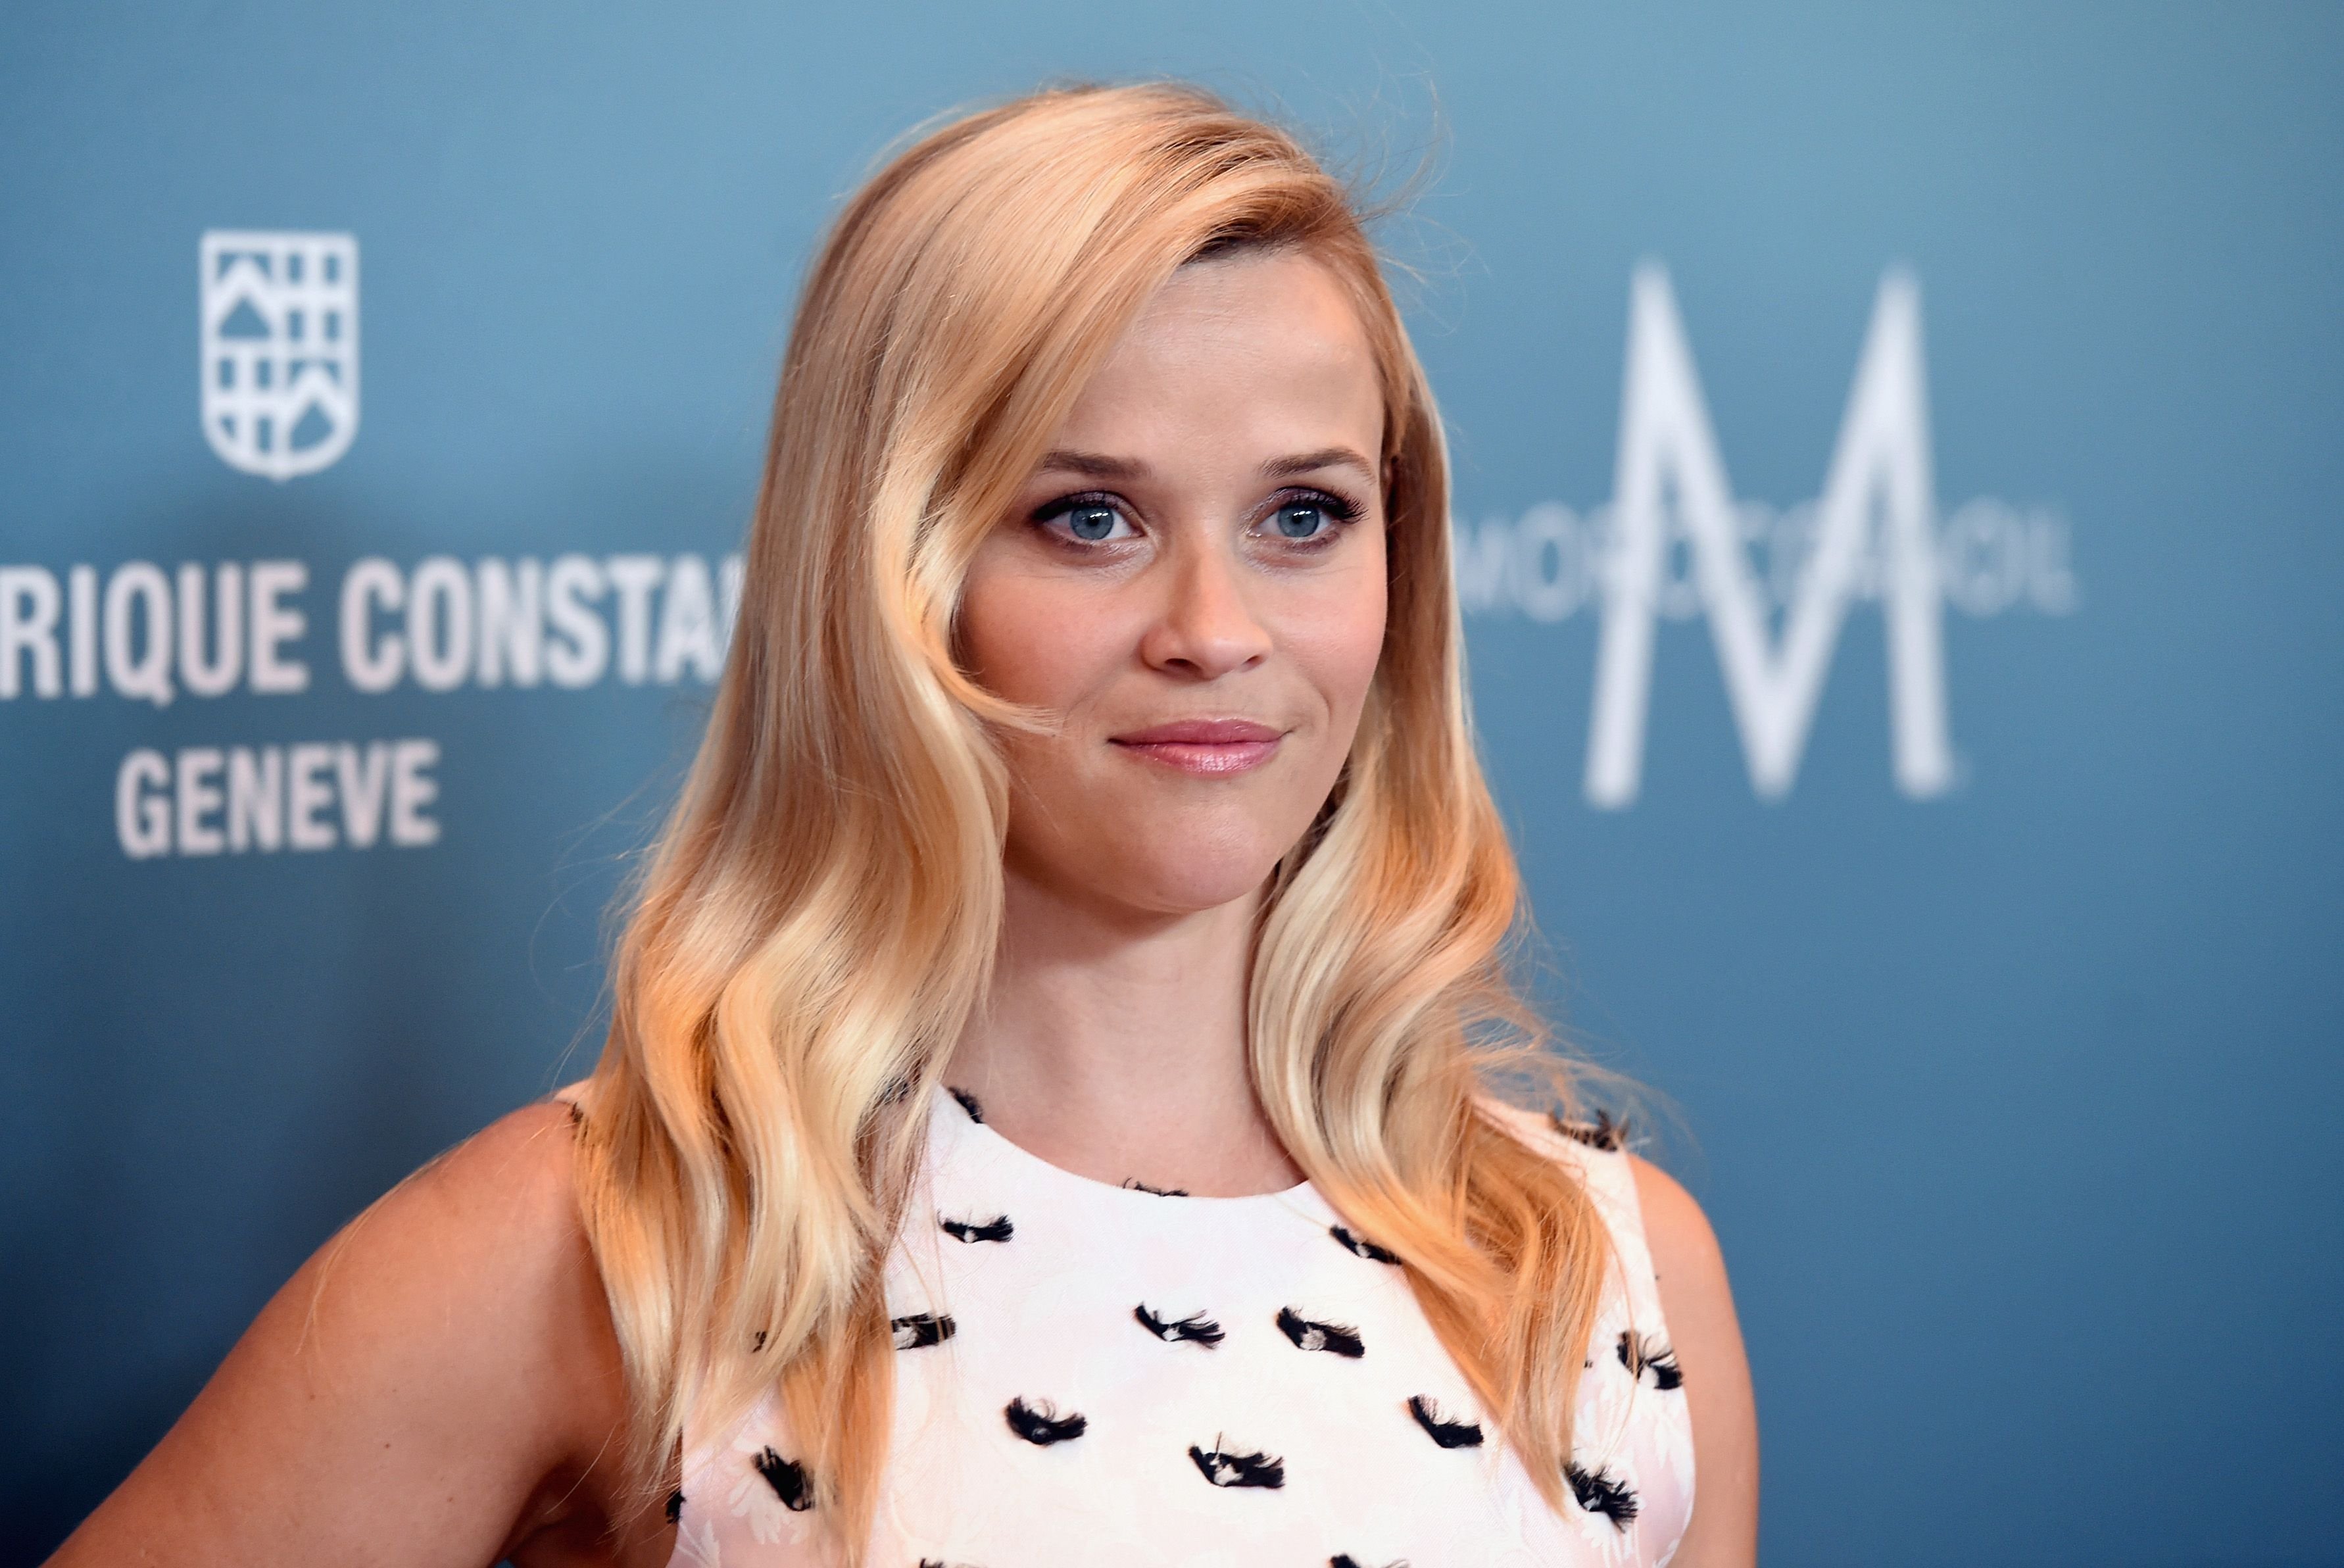 Actress Reese Witherspoon at Variety's Power Of Women Luncheon at the Beverly Wilshire Four Seasons Hotel on October 9, 2015 in Beverly Hills, California.| Photo: Getty Images